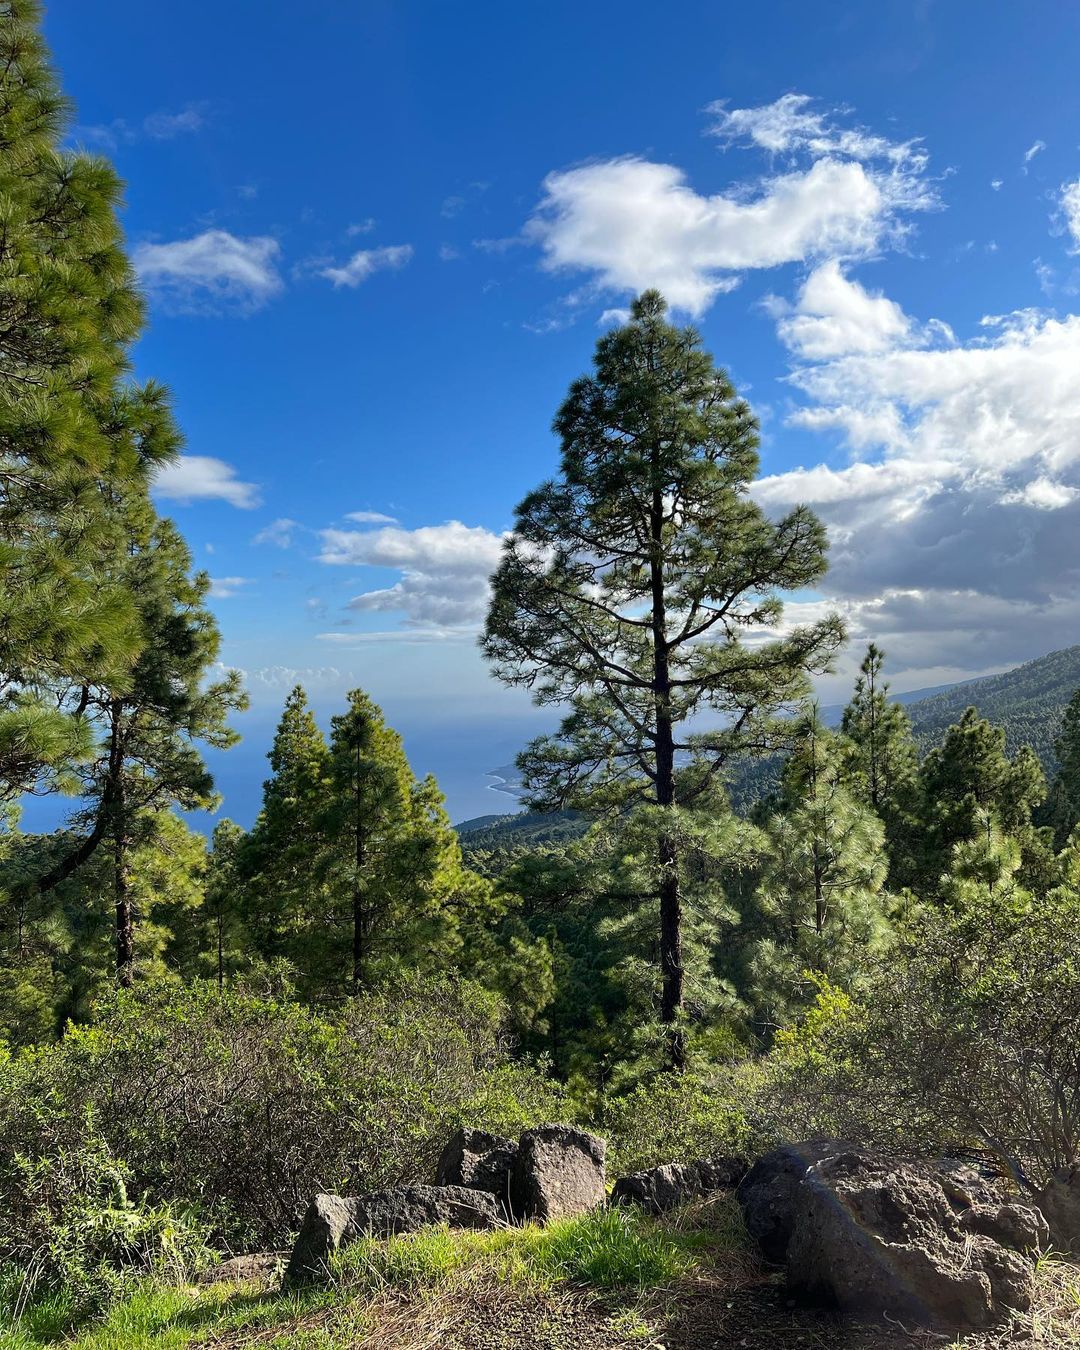 climb up and enjoy the view of Teide National Park